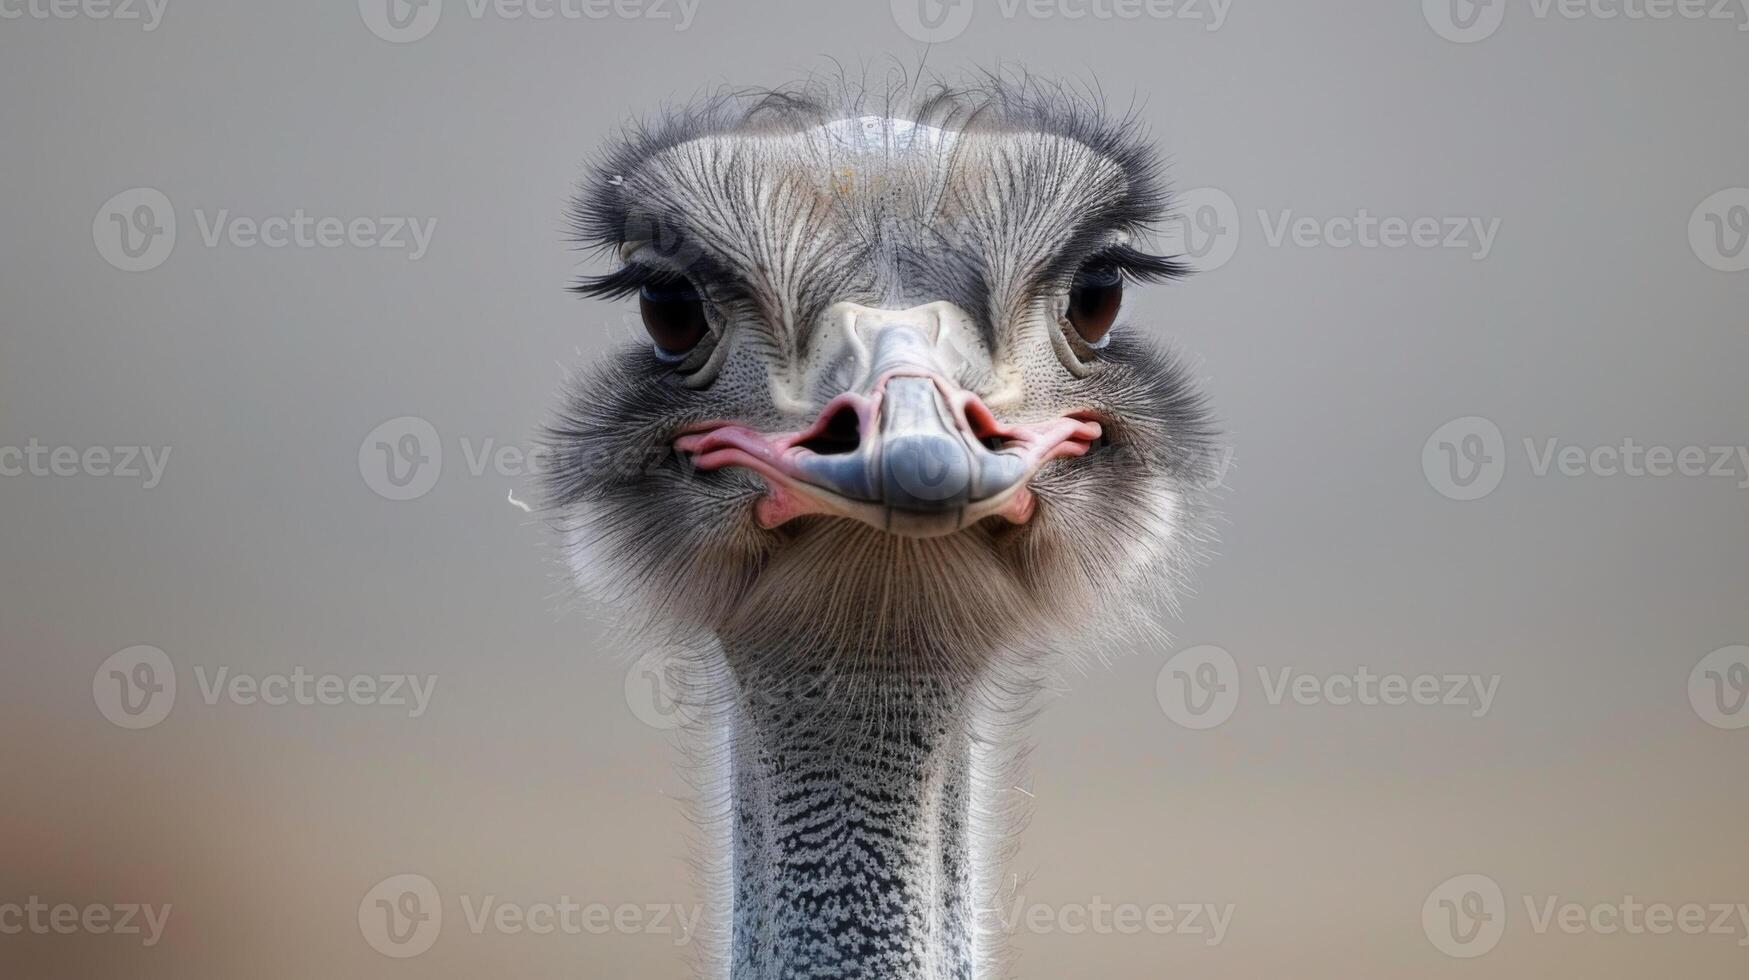 Close-up ostrich portrait with detailed feathers, beak, and intense eyes photo